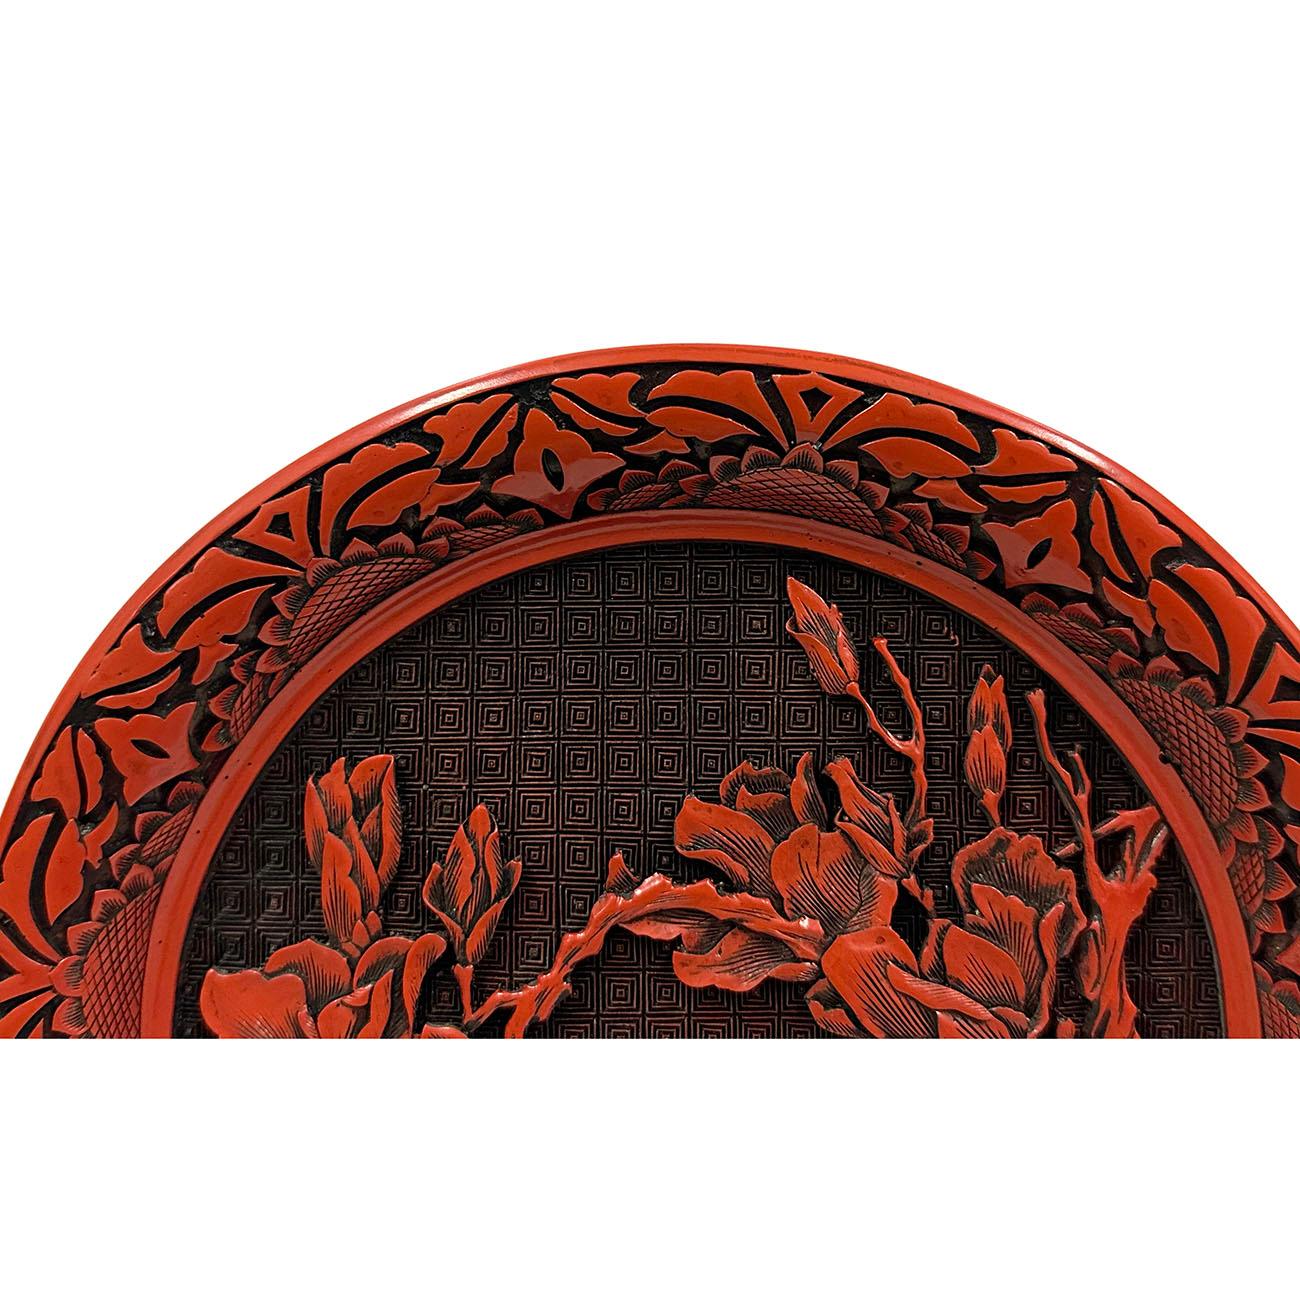 Hand-Carved Mid-20th Century Chinese Hand Carved Cinnabar Lacquer Plate For Sale